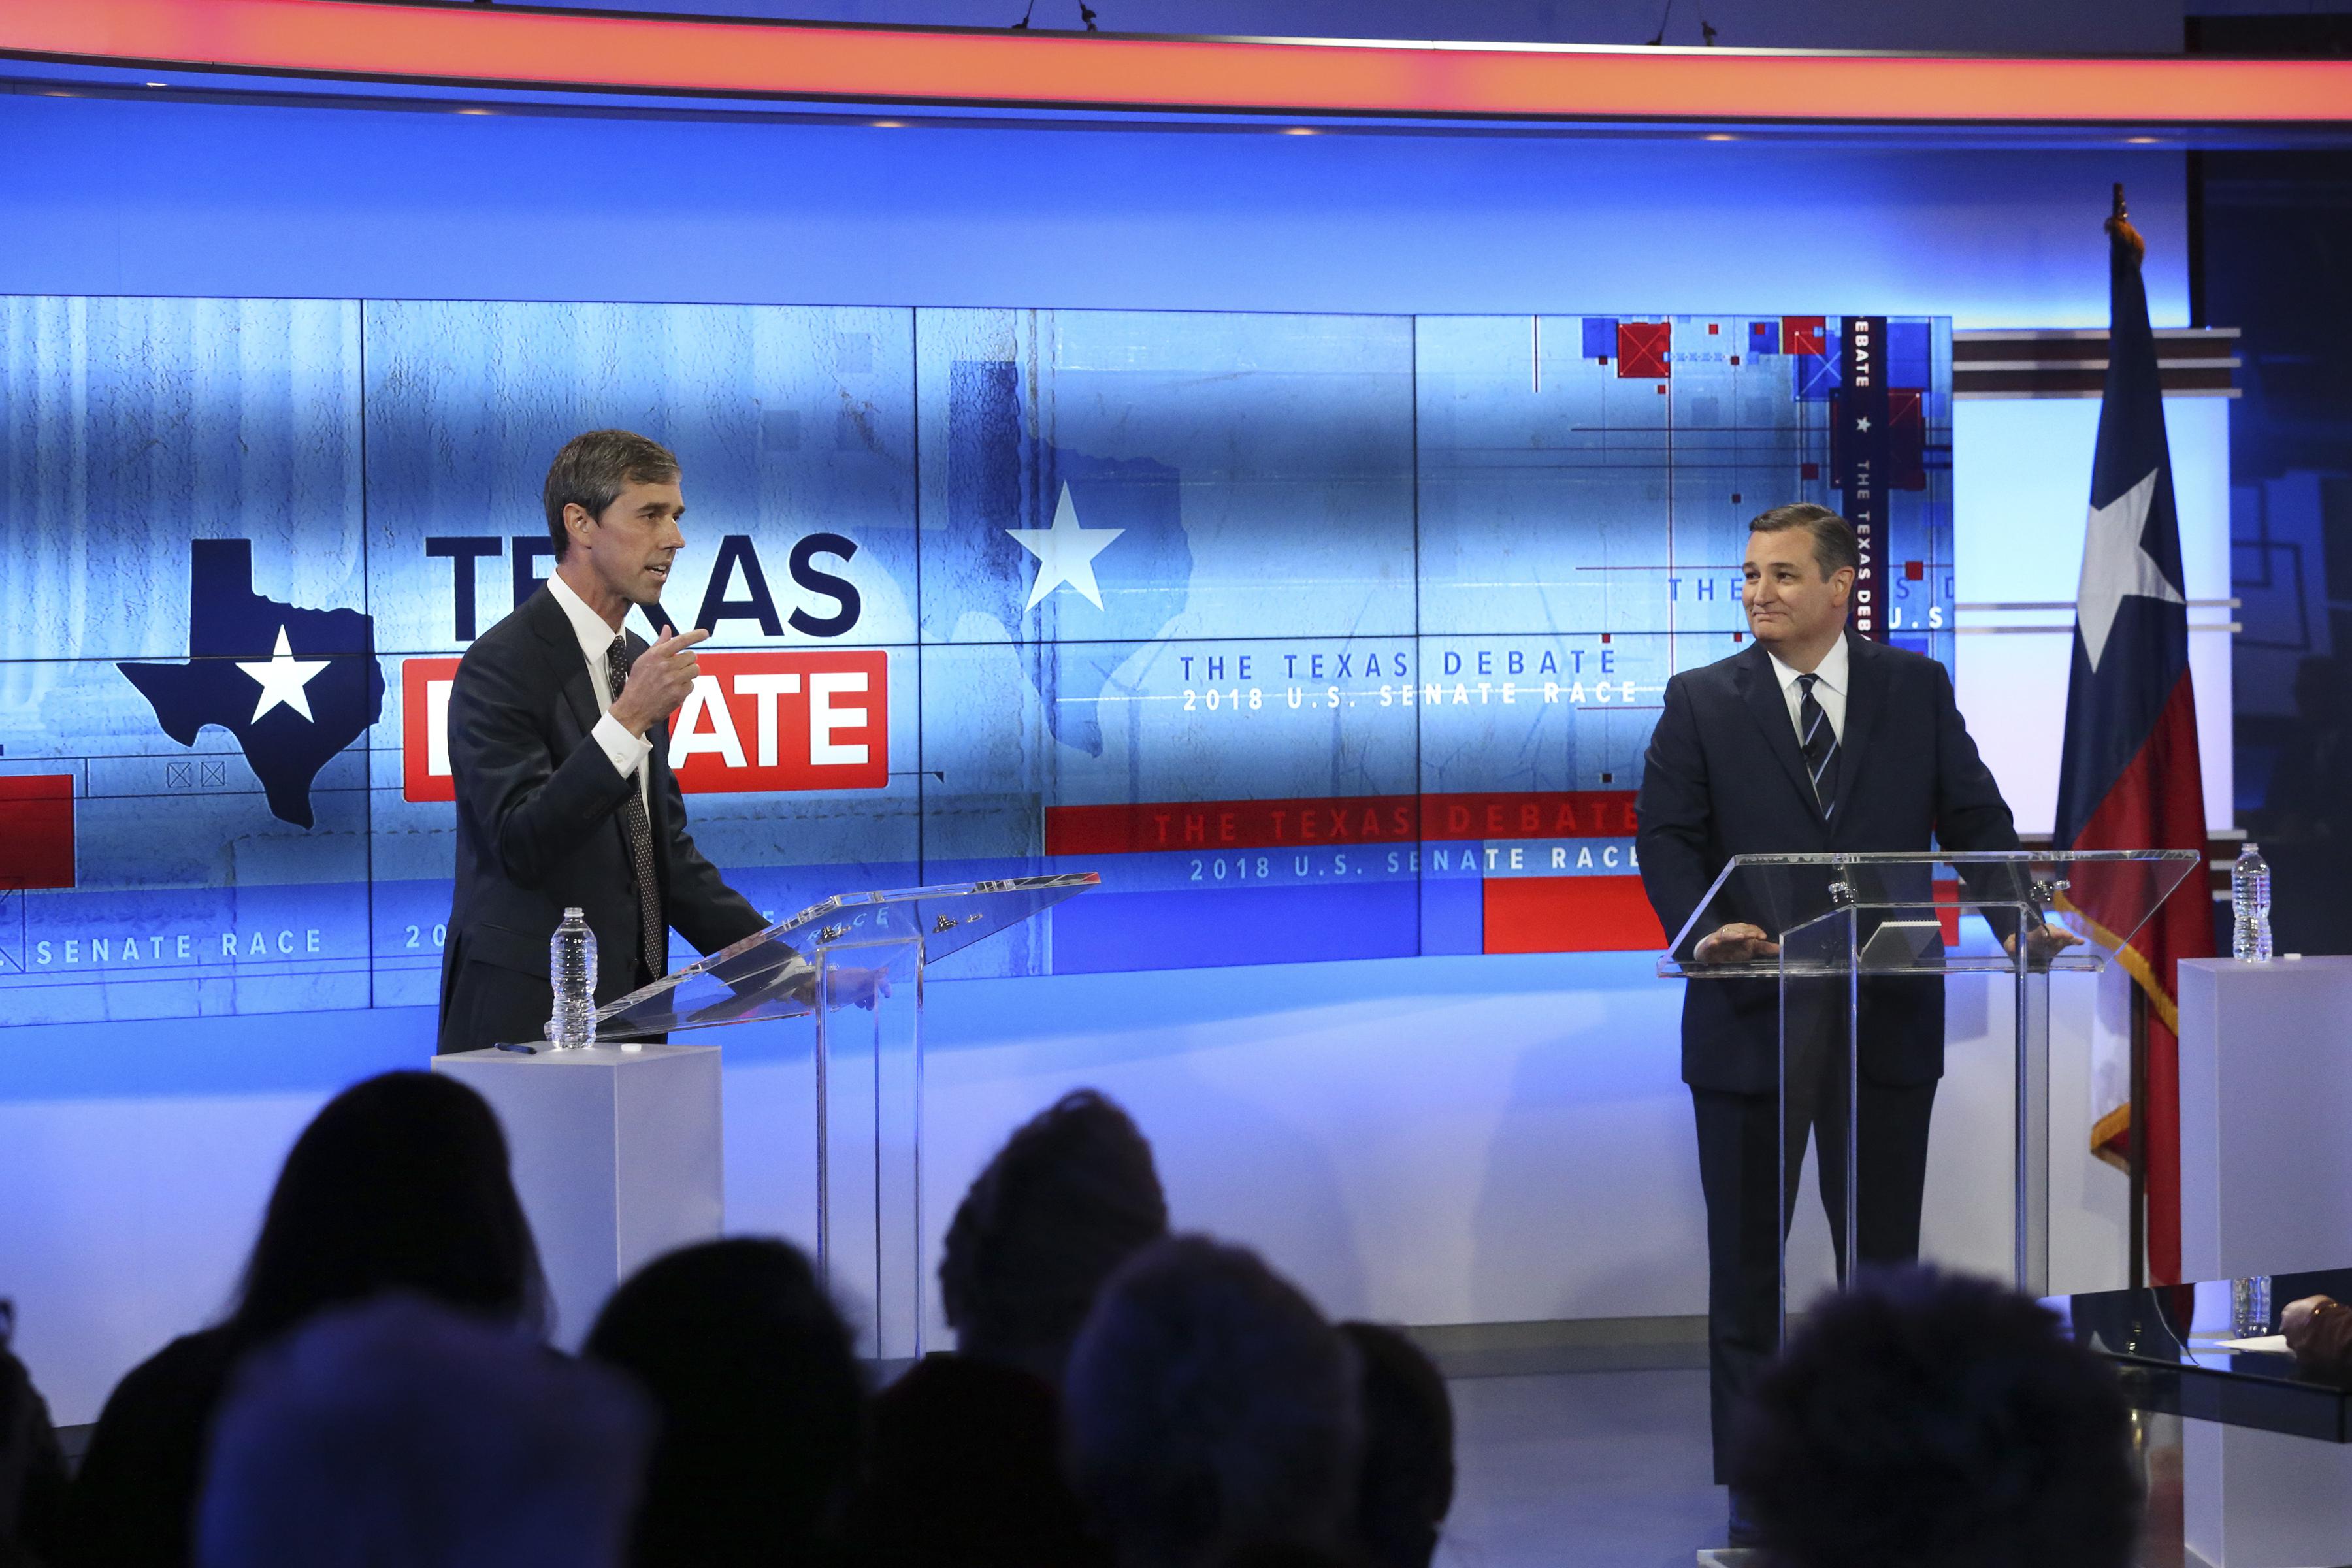 Rep. Beto O’Rourke and Sen. Ted Cruz stand at clear podiums onstage.